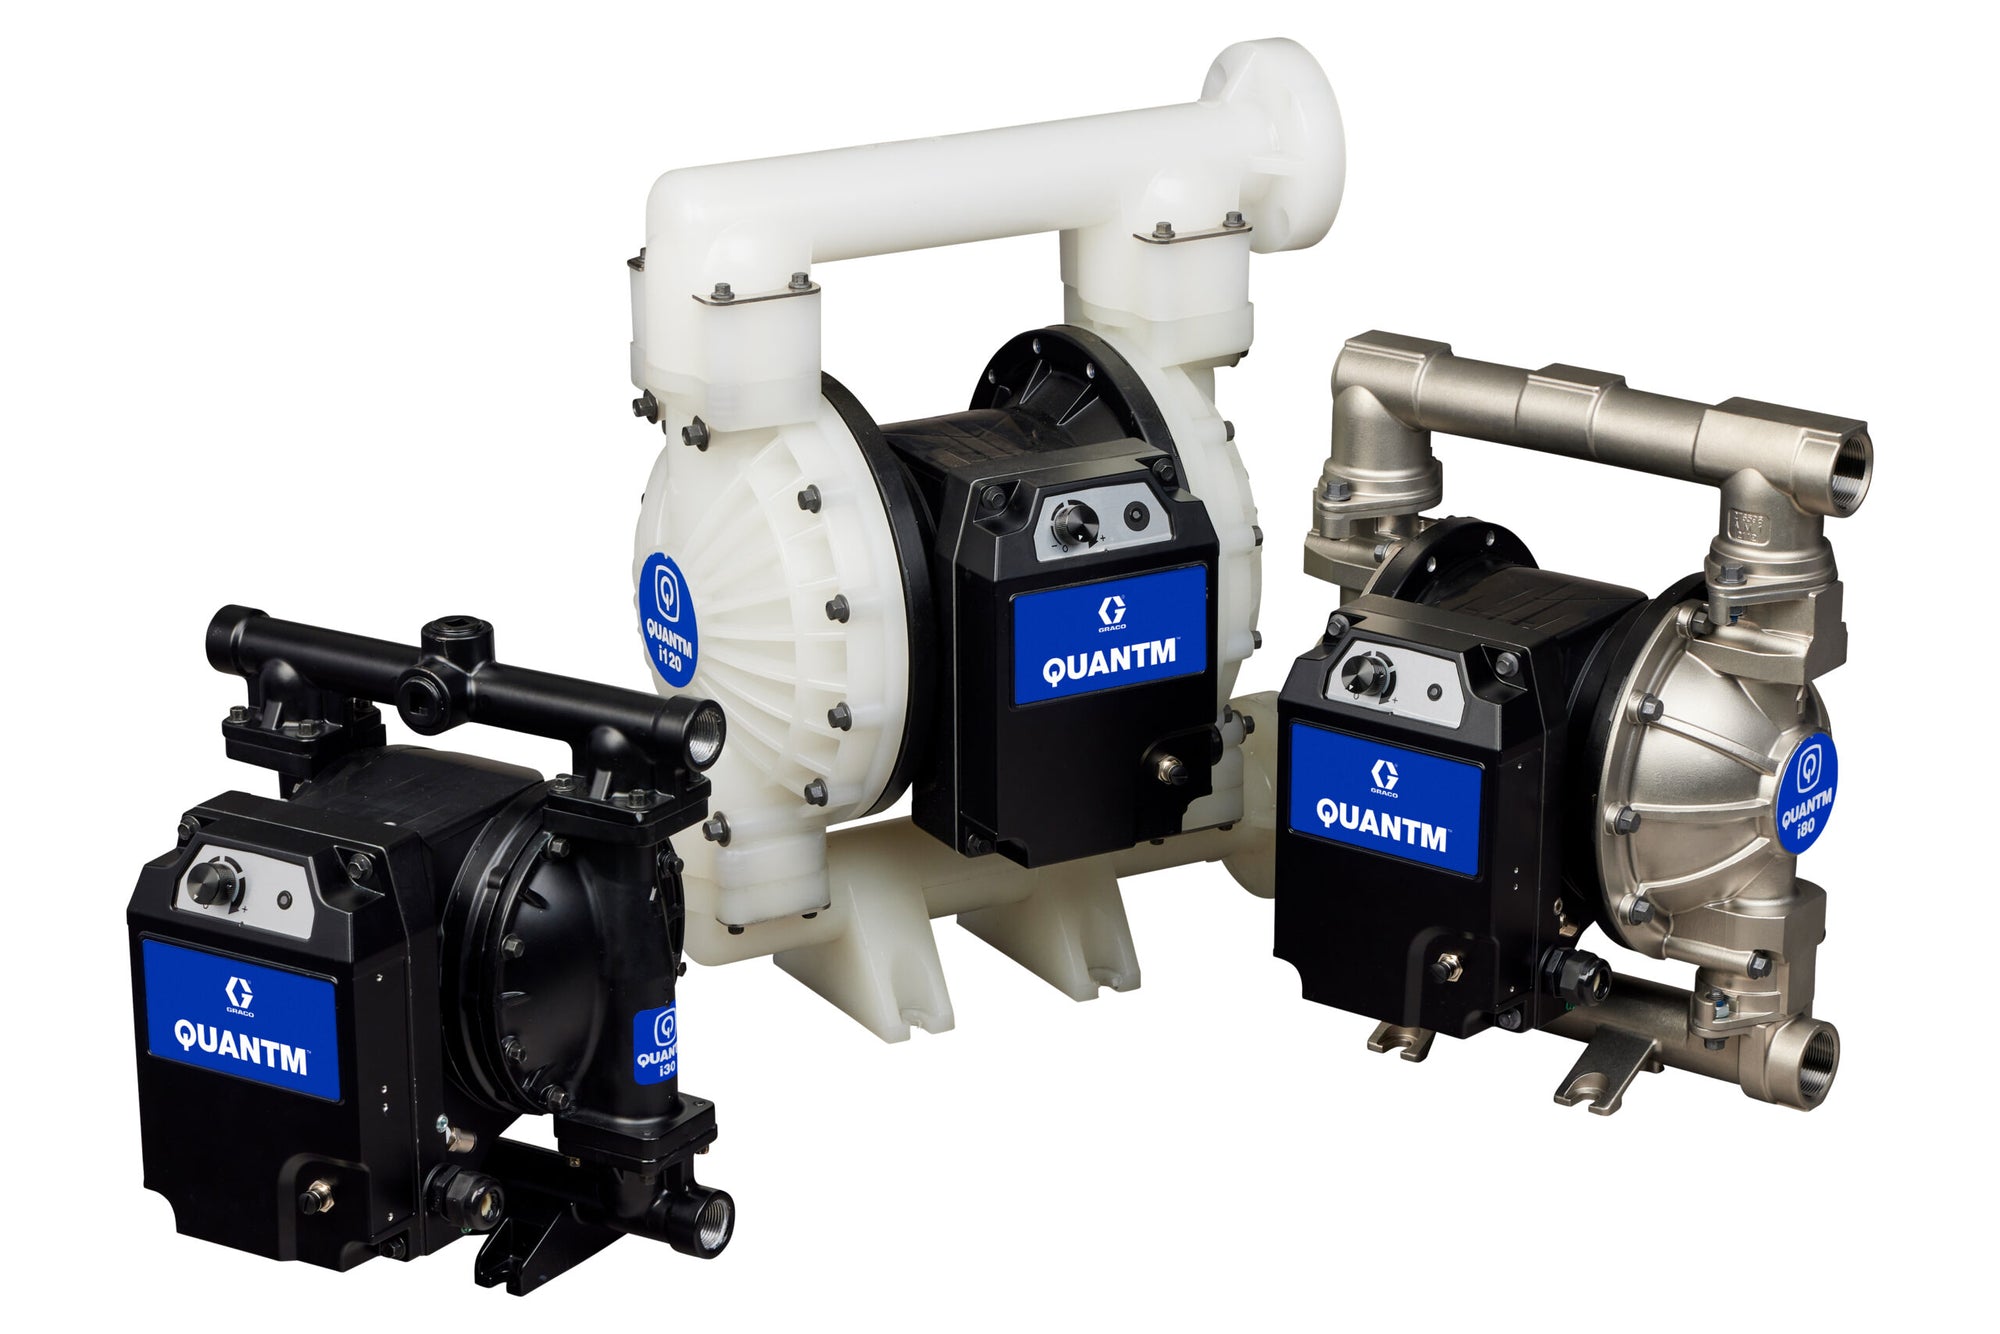 Introduction to Graco’s Quantm EODD Pumps | Reliable & Versatile Pumping Solutions